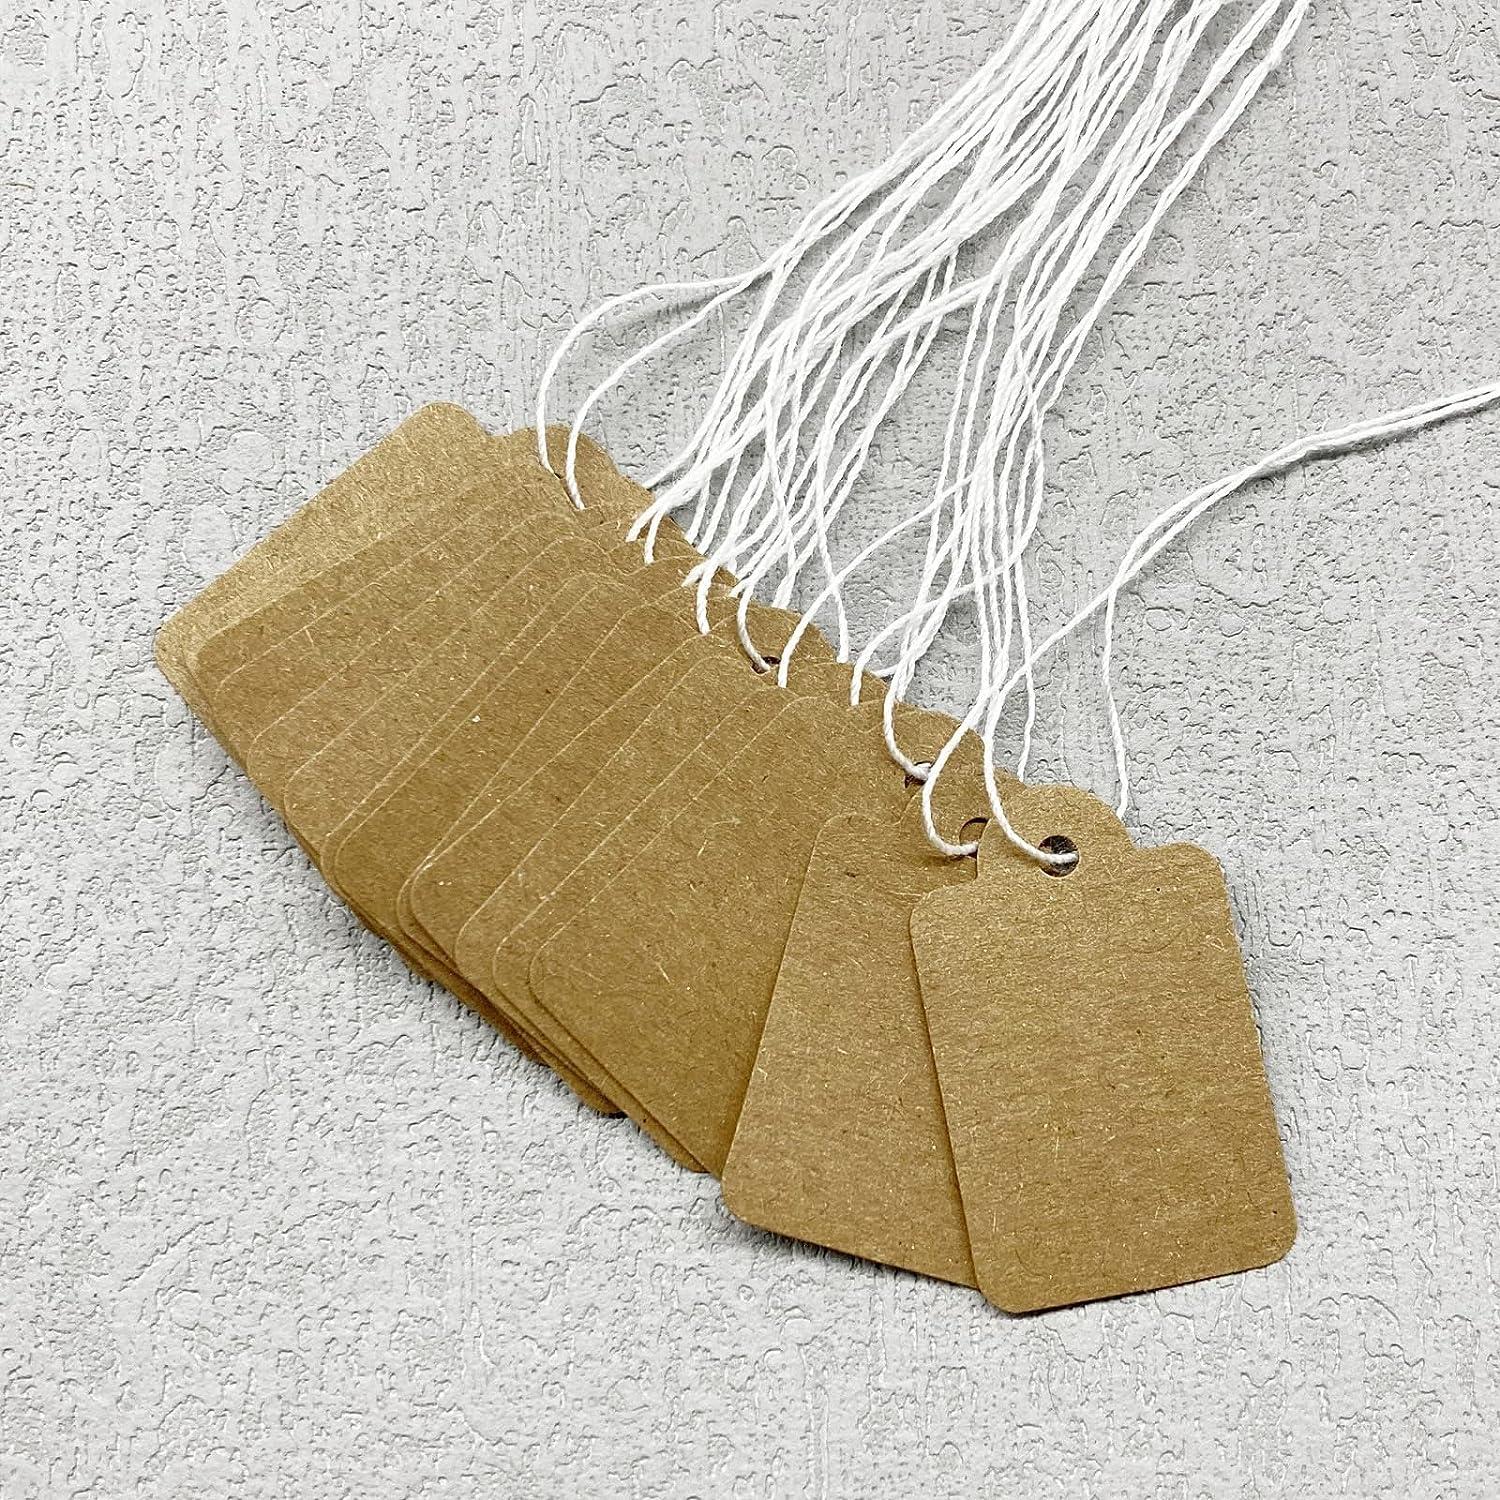 Kraft Paper Gift Tags with String, 500Pcs Blank Writable Tags